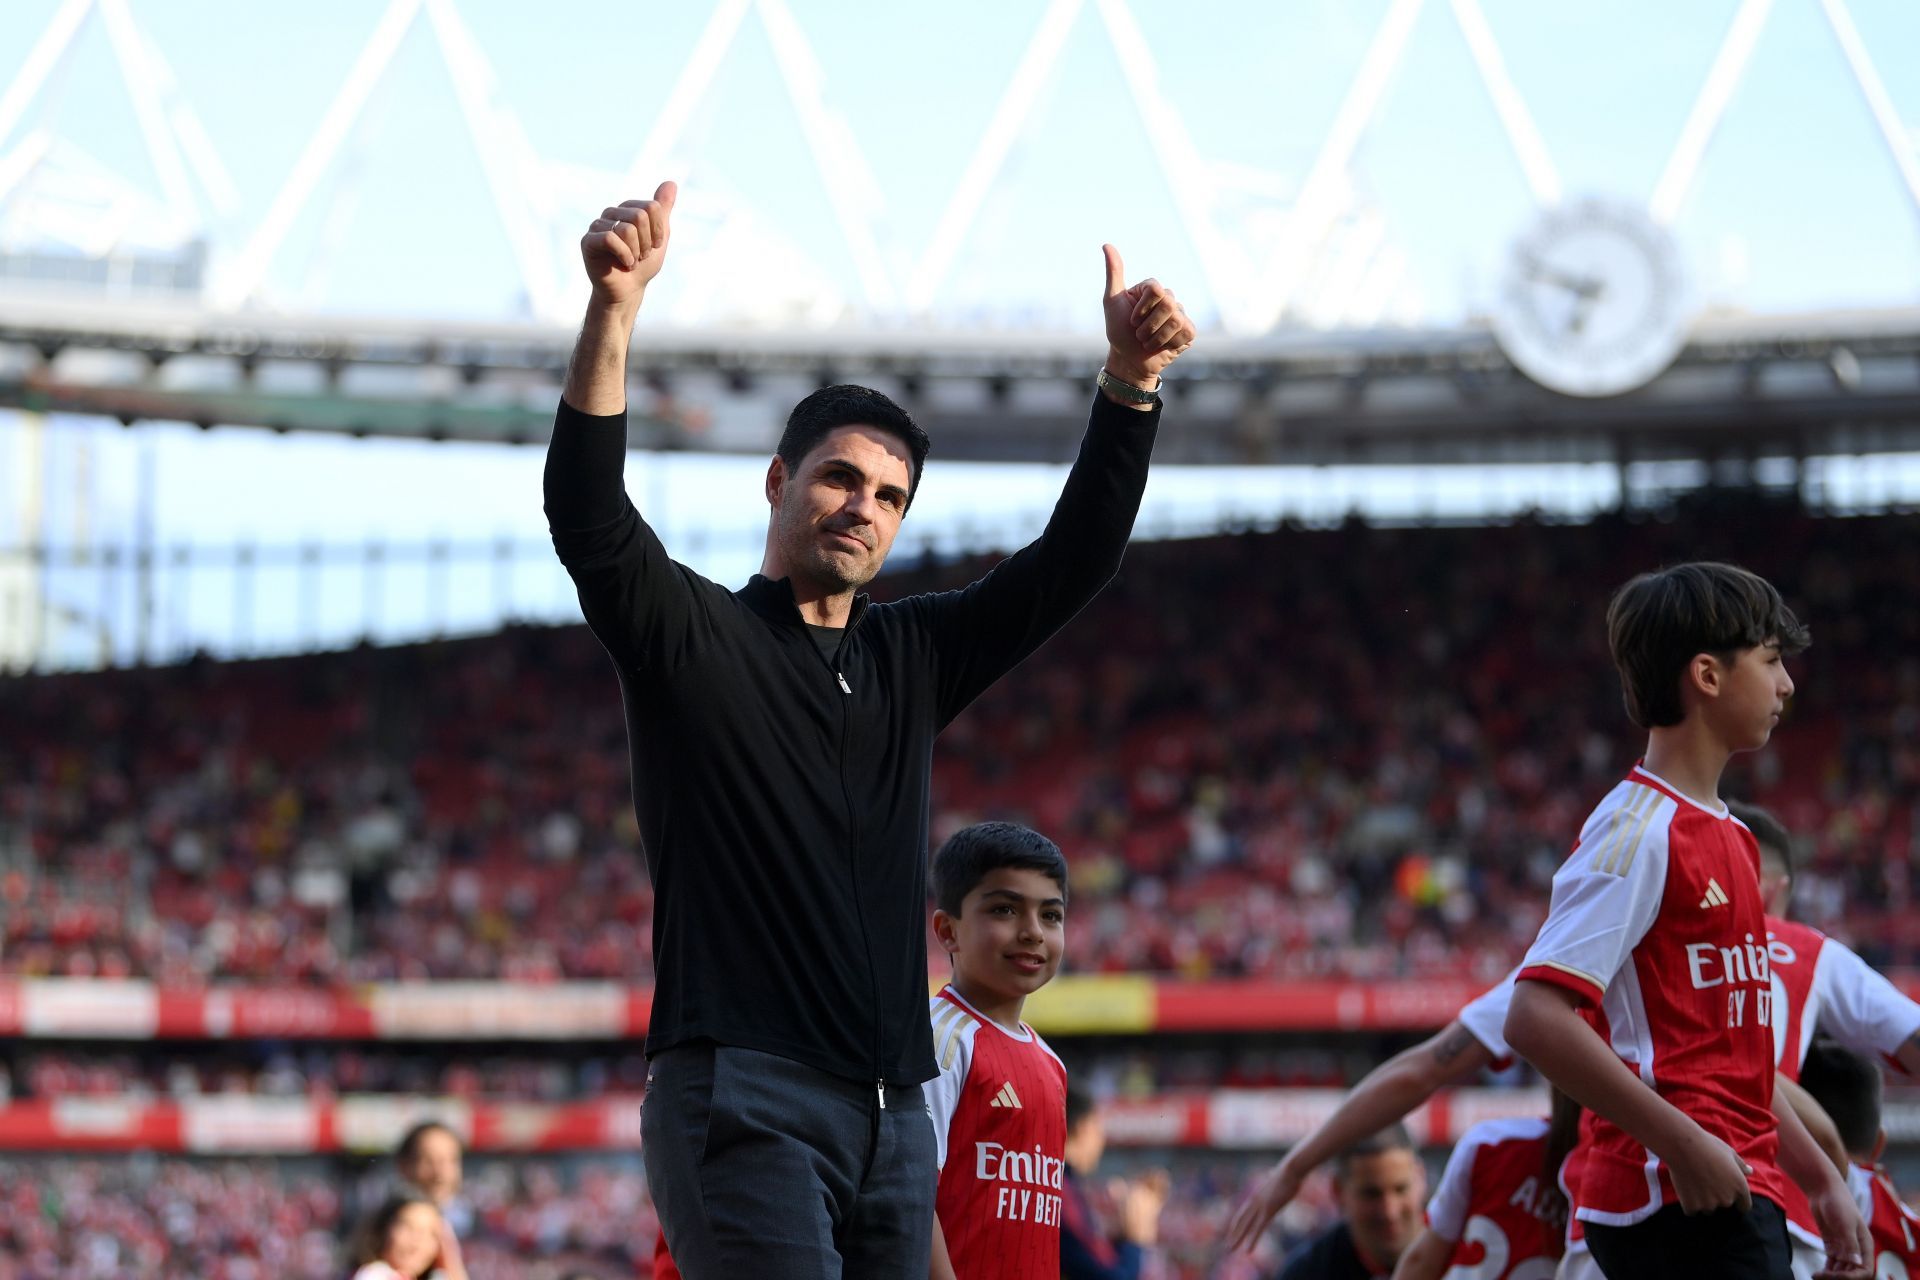 Mikel Arteta is happy he chose to join the Gunners.